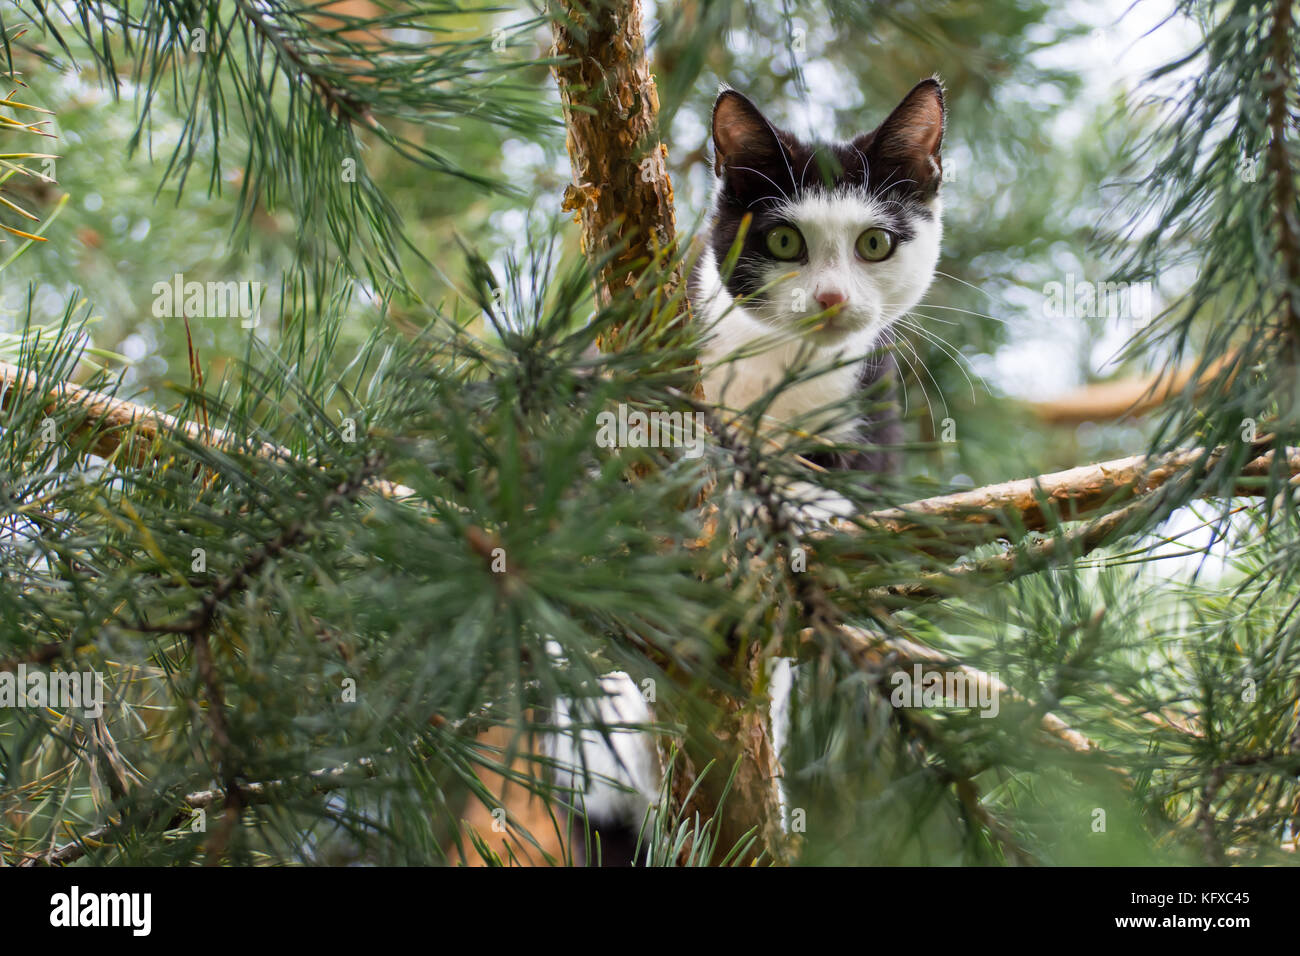 Black and white cat up high on a pine tree, looking in the camera Stock Photo